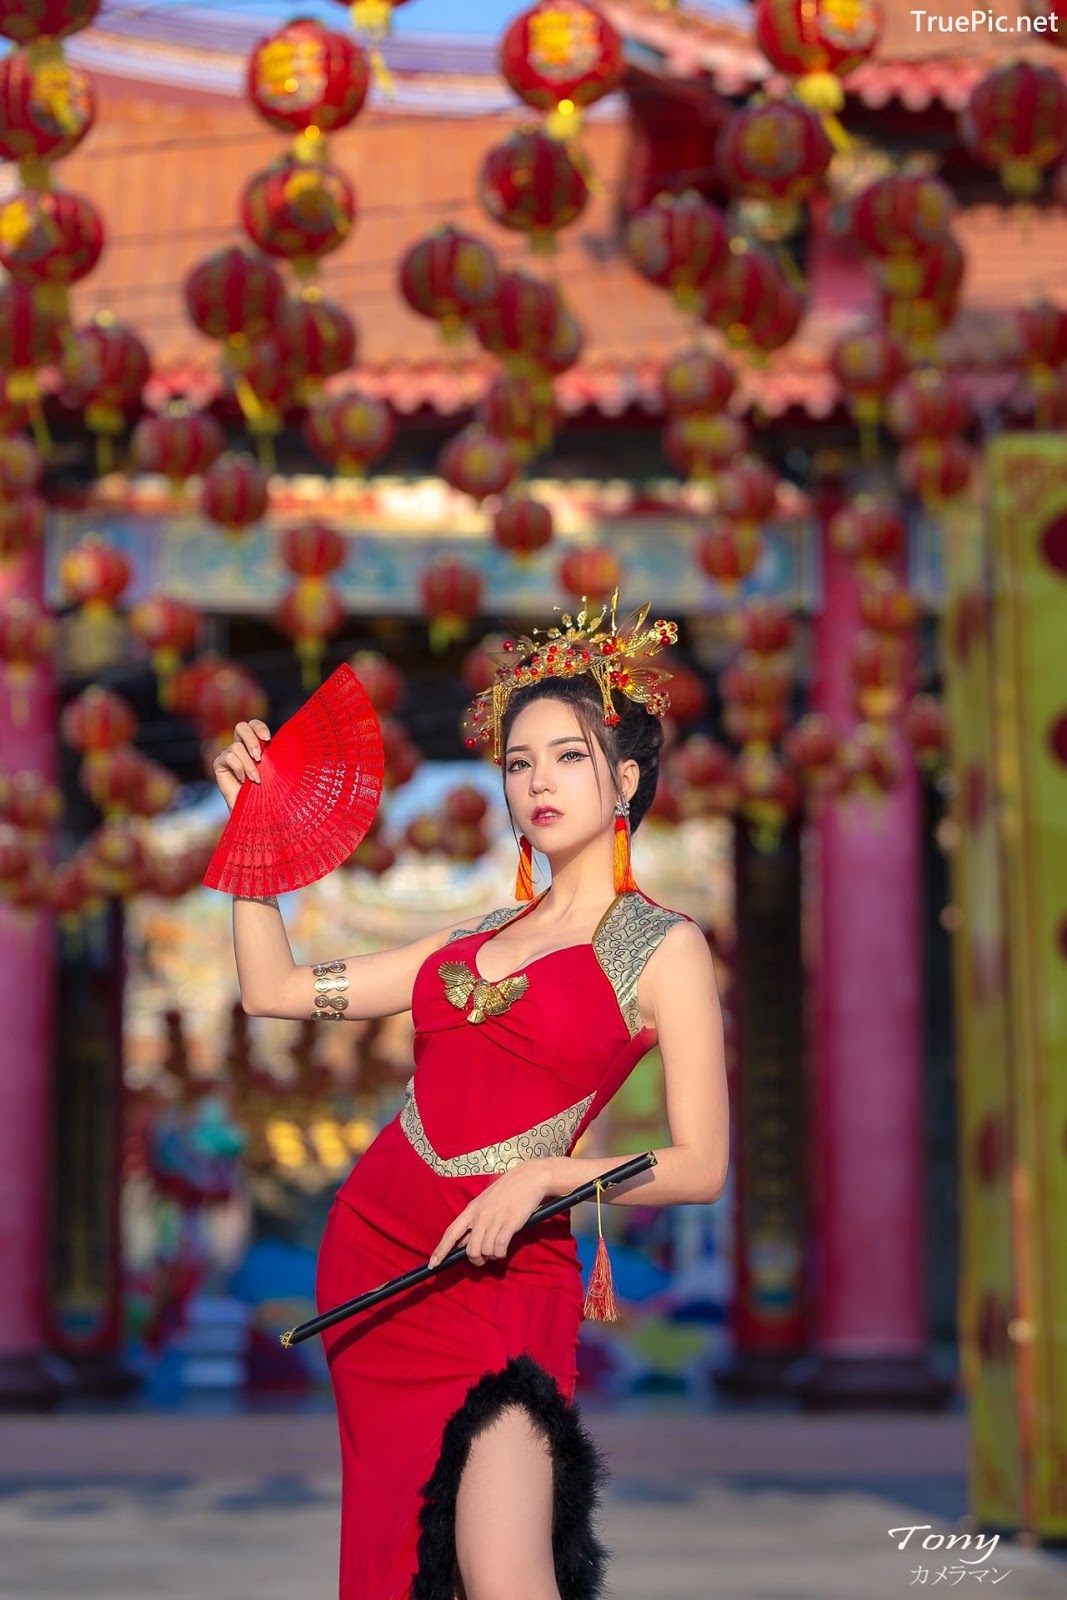 Image-Thailand-Hot-Model-Janet-Kanokwan-Saesim-Sexy-Chinese-Girl-Red-Dress-Traditional-TruePic.net- Picture-37